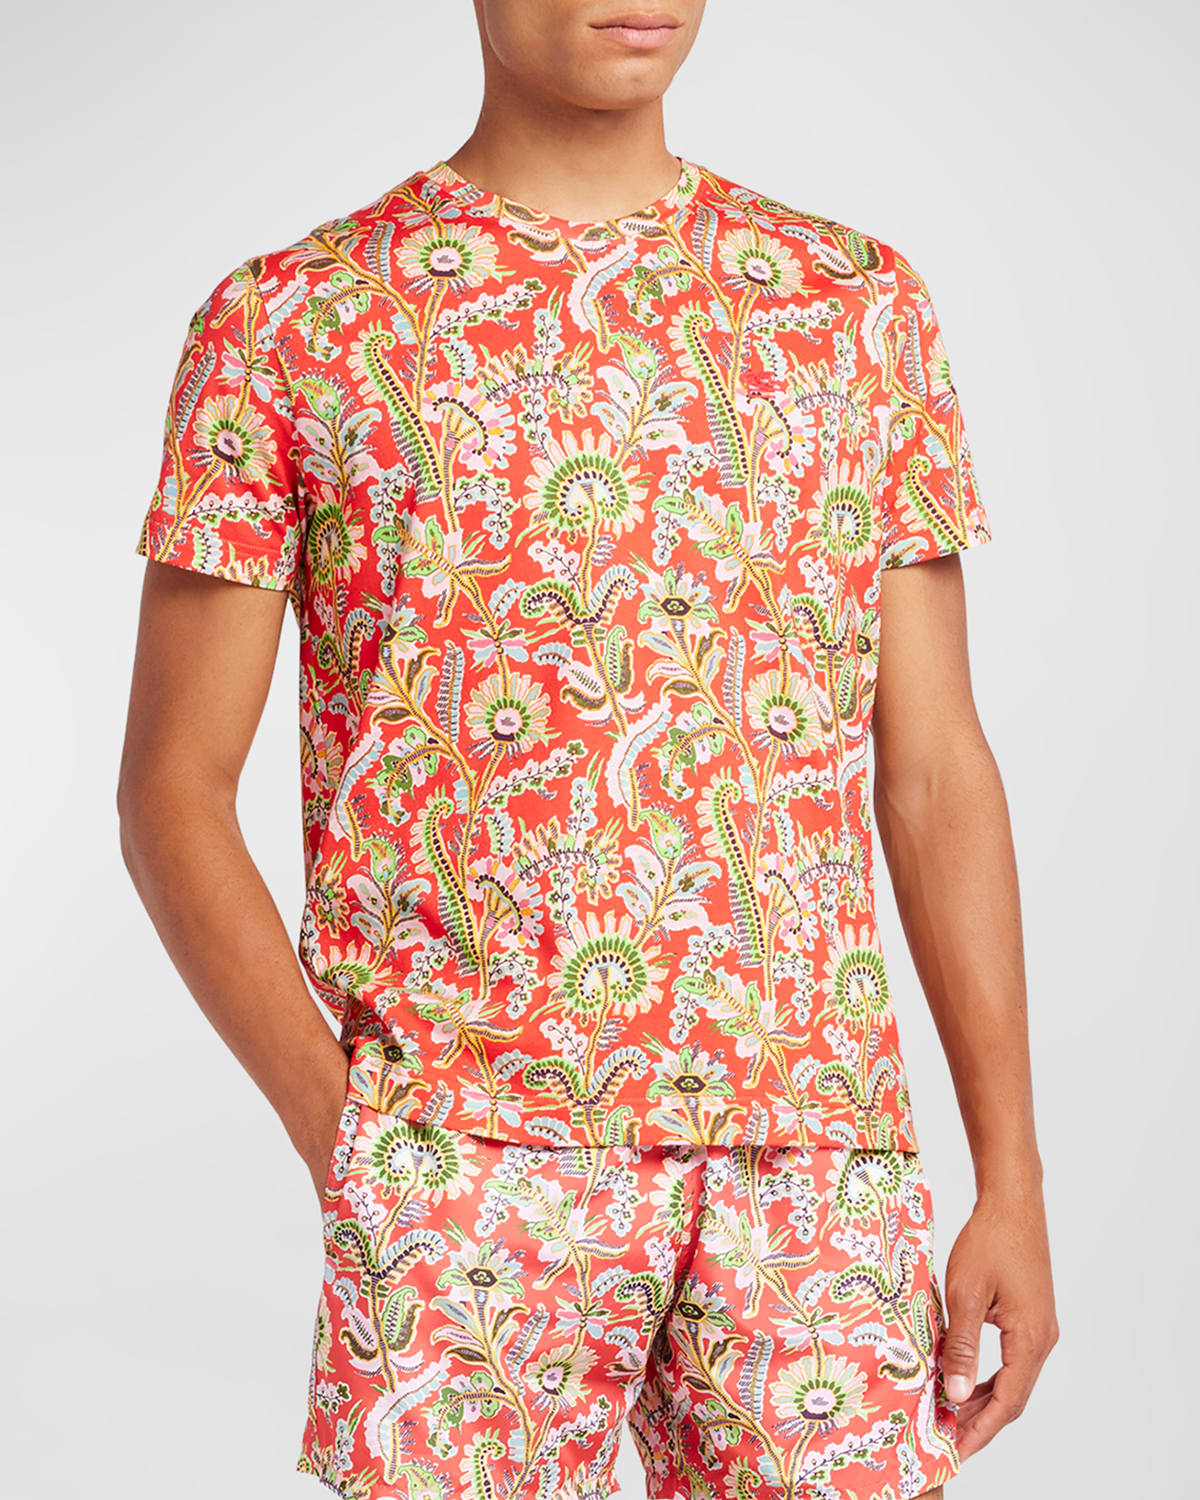 Etro Men's Bright Paisley T-shirt In Print On Red Base